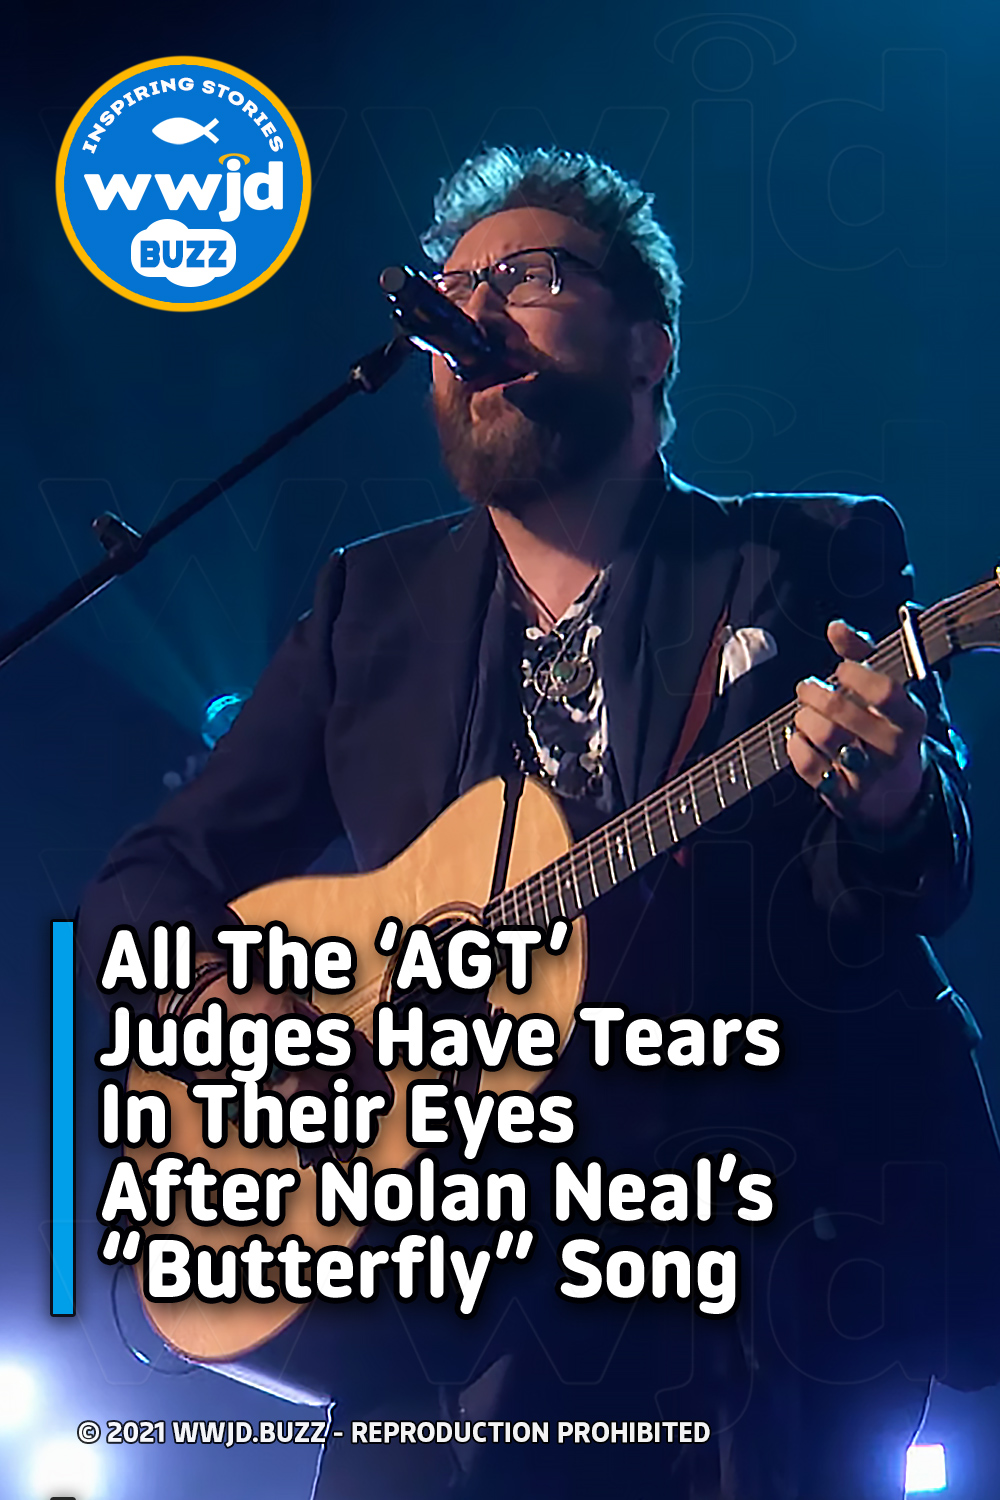 All The ‘AGT’ Judges Have Tears In Their Eyes After Nolan Neal’s “Butterfly” Song